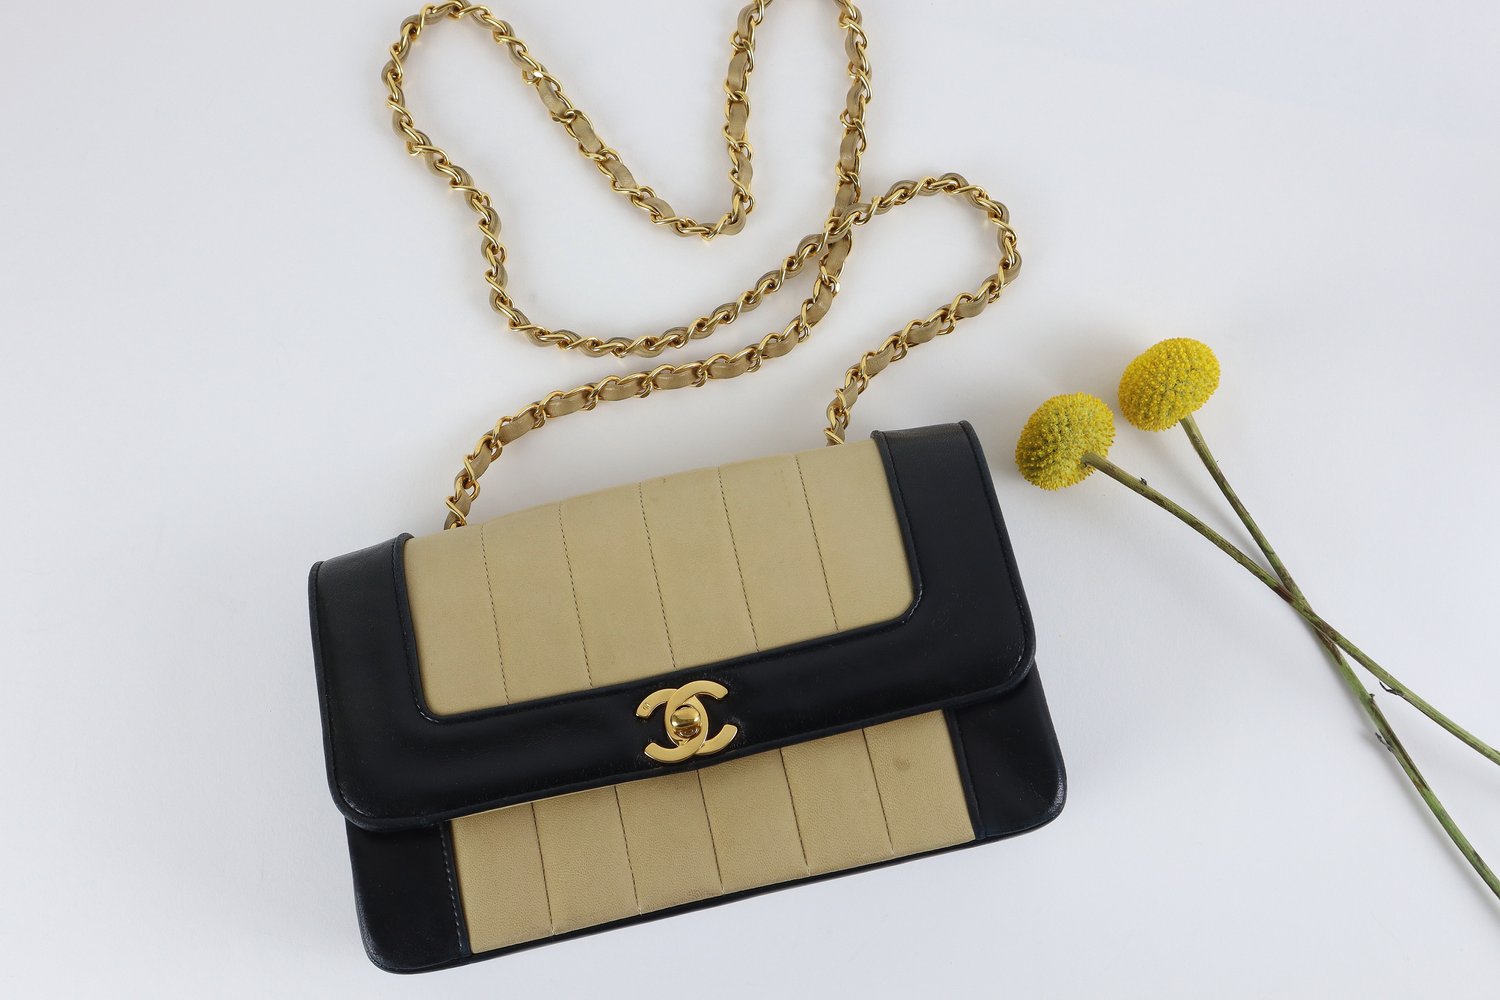 Chanel Classic Black x Beige Vertical Quilted Lambskin Small Flap Bag —  Elegante Finds